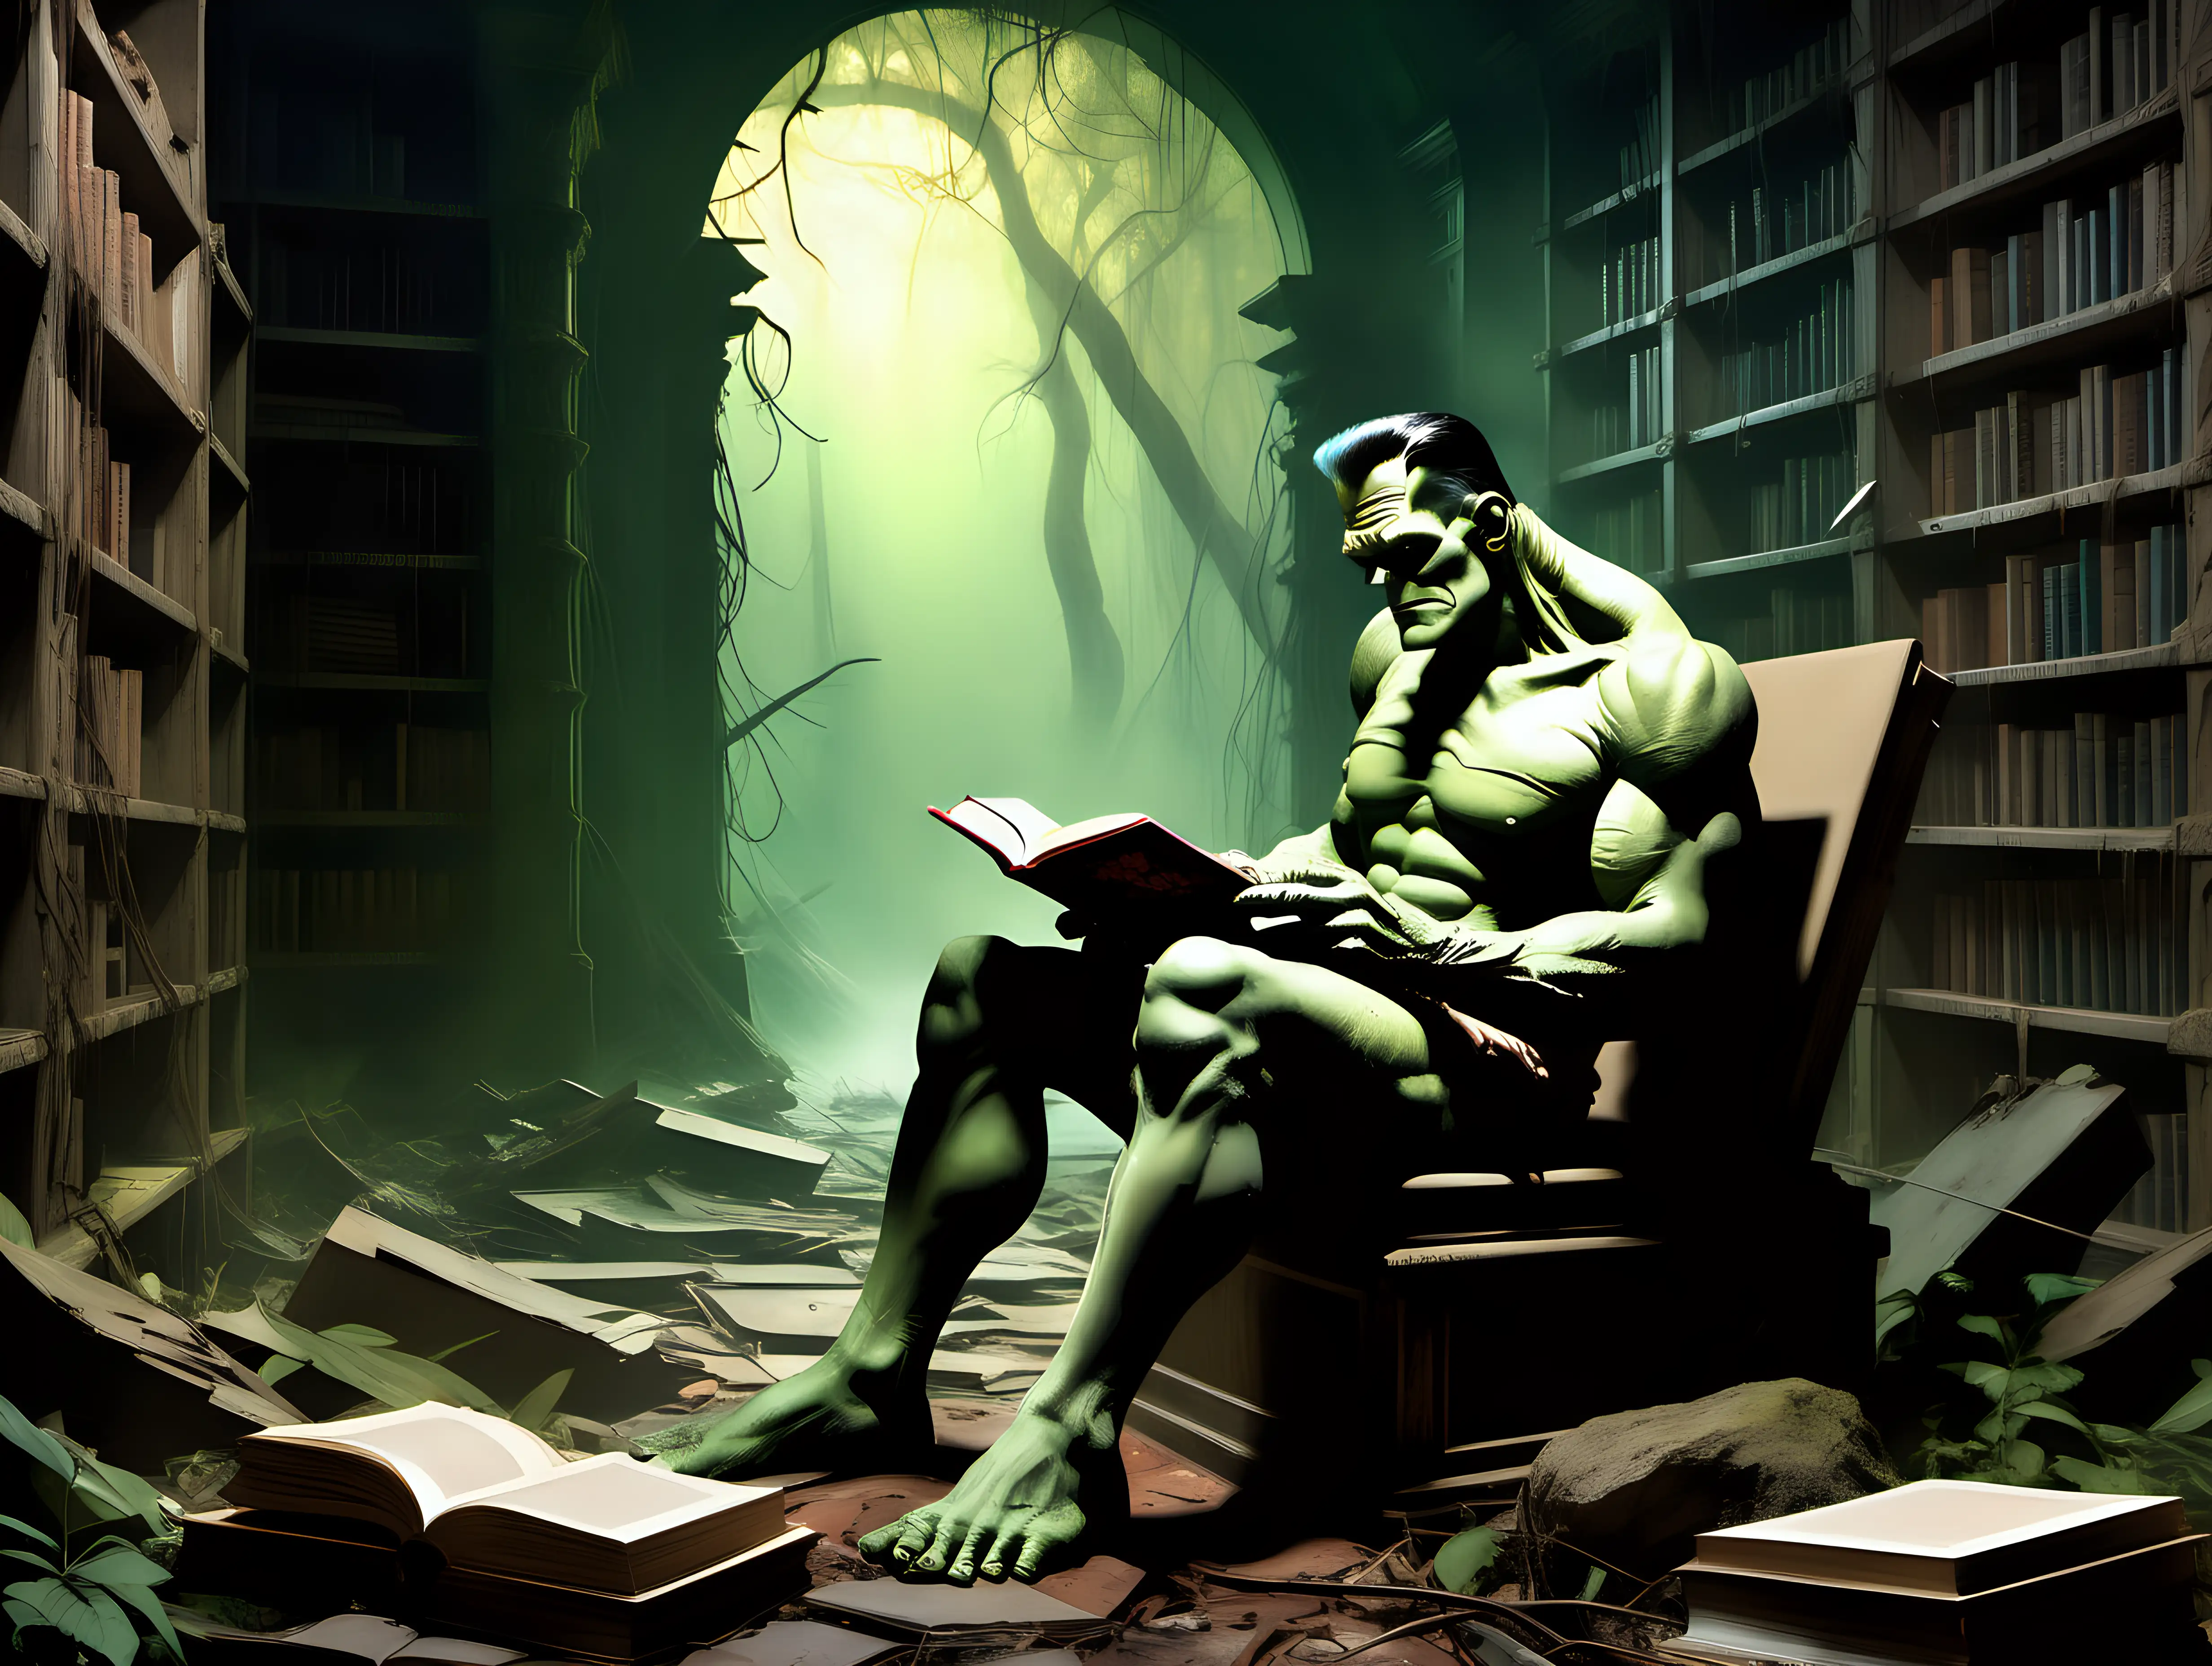 Frankenstein reading a book inside of an abandoned forgotten library in the Amazon forest Frank Frazetta style